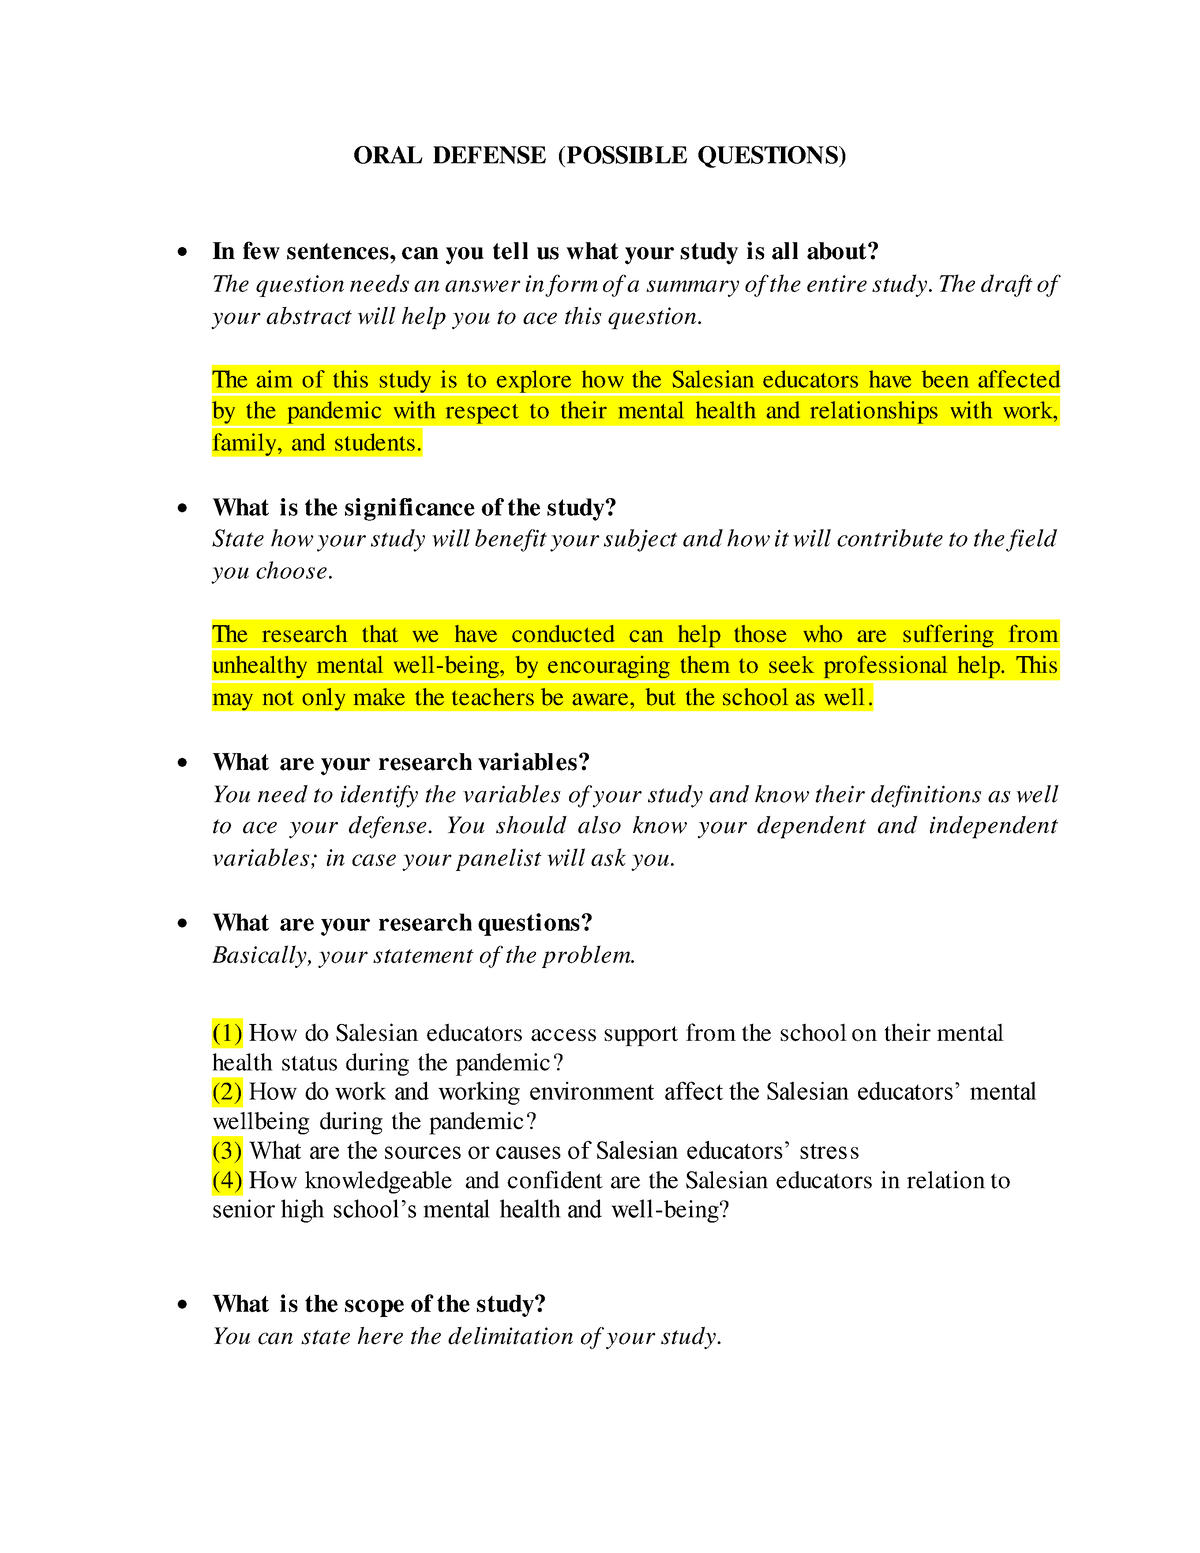 common thesis defense questions and answers pdf